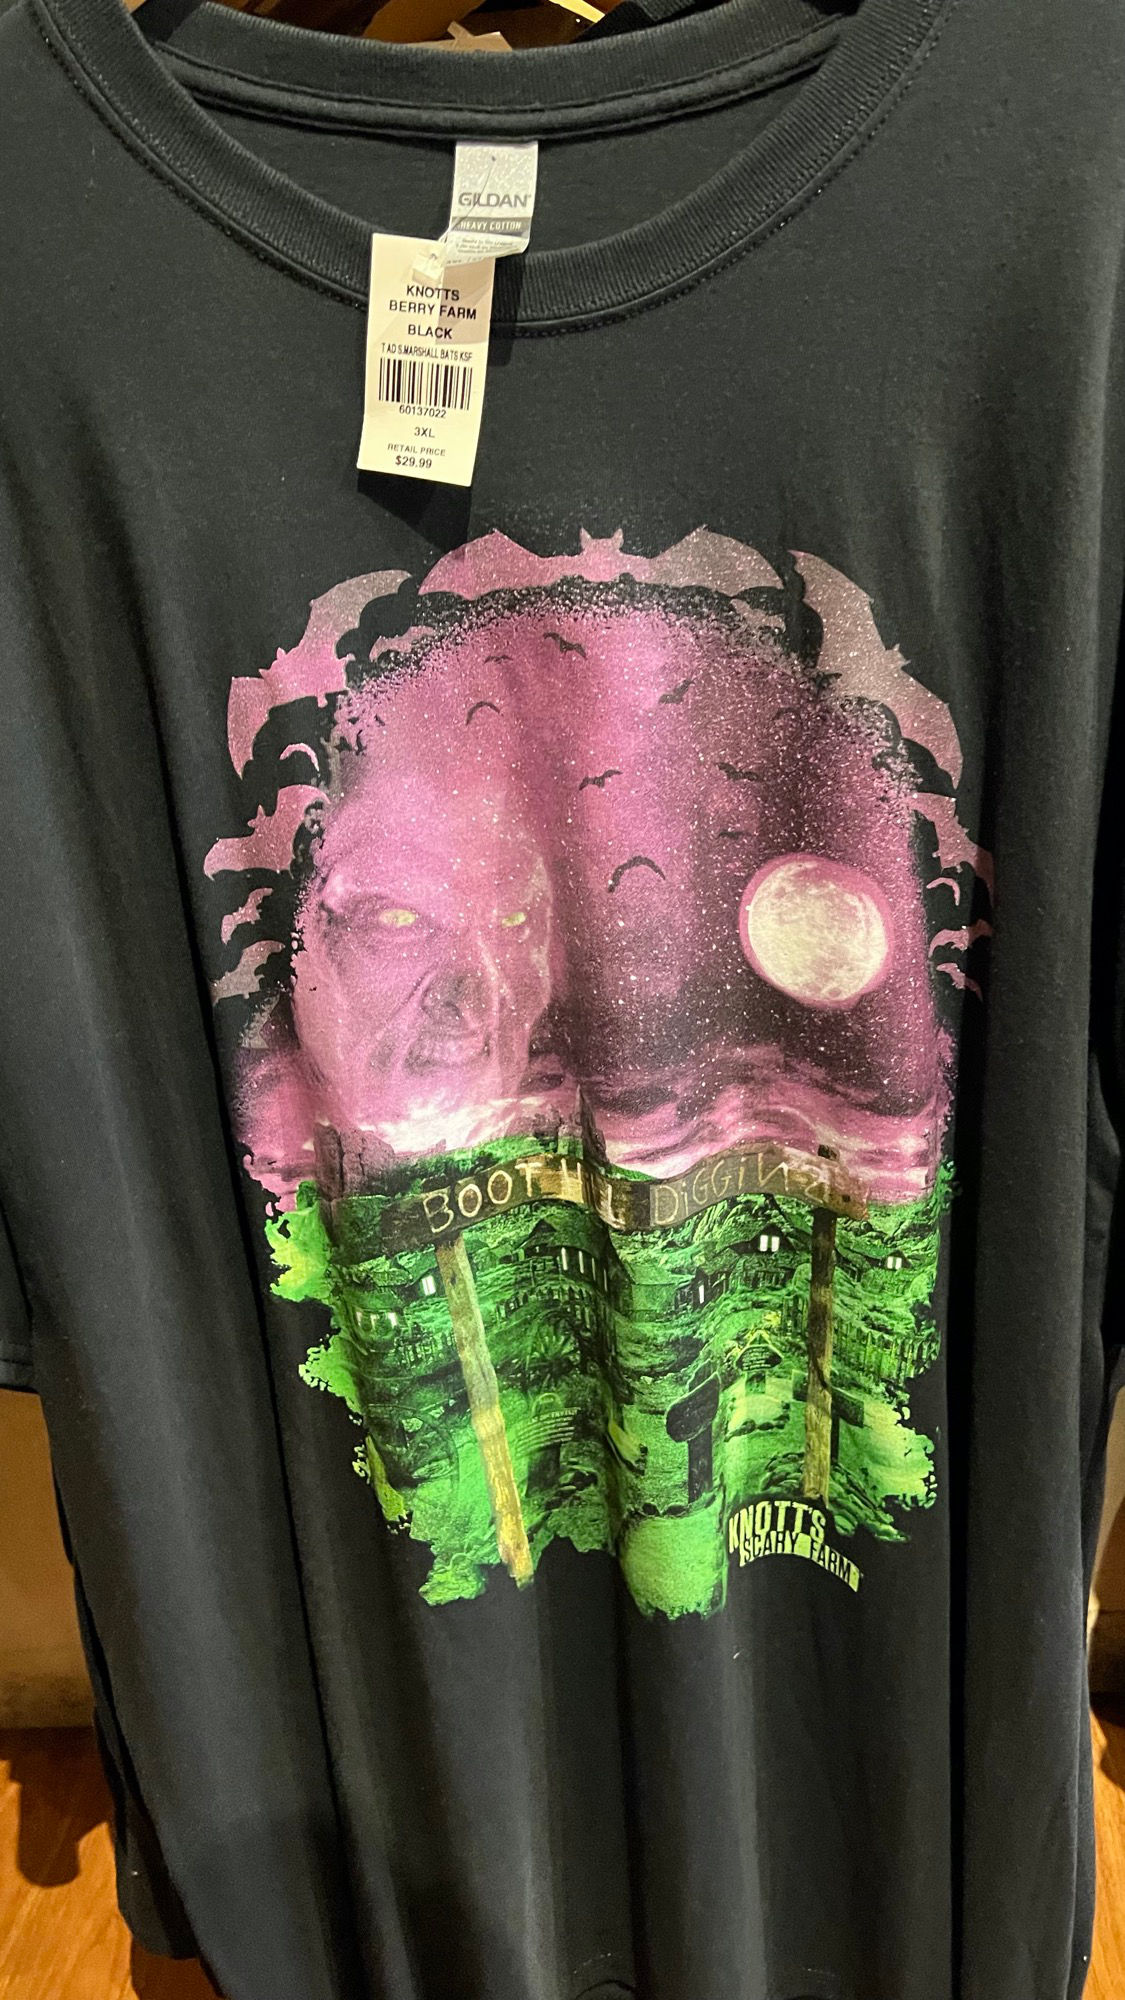 Toy Junction Knott's Scary Farm Shirts